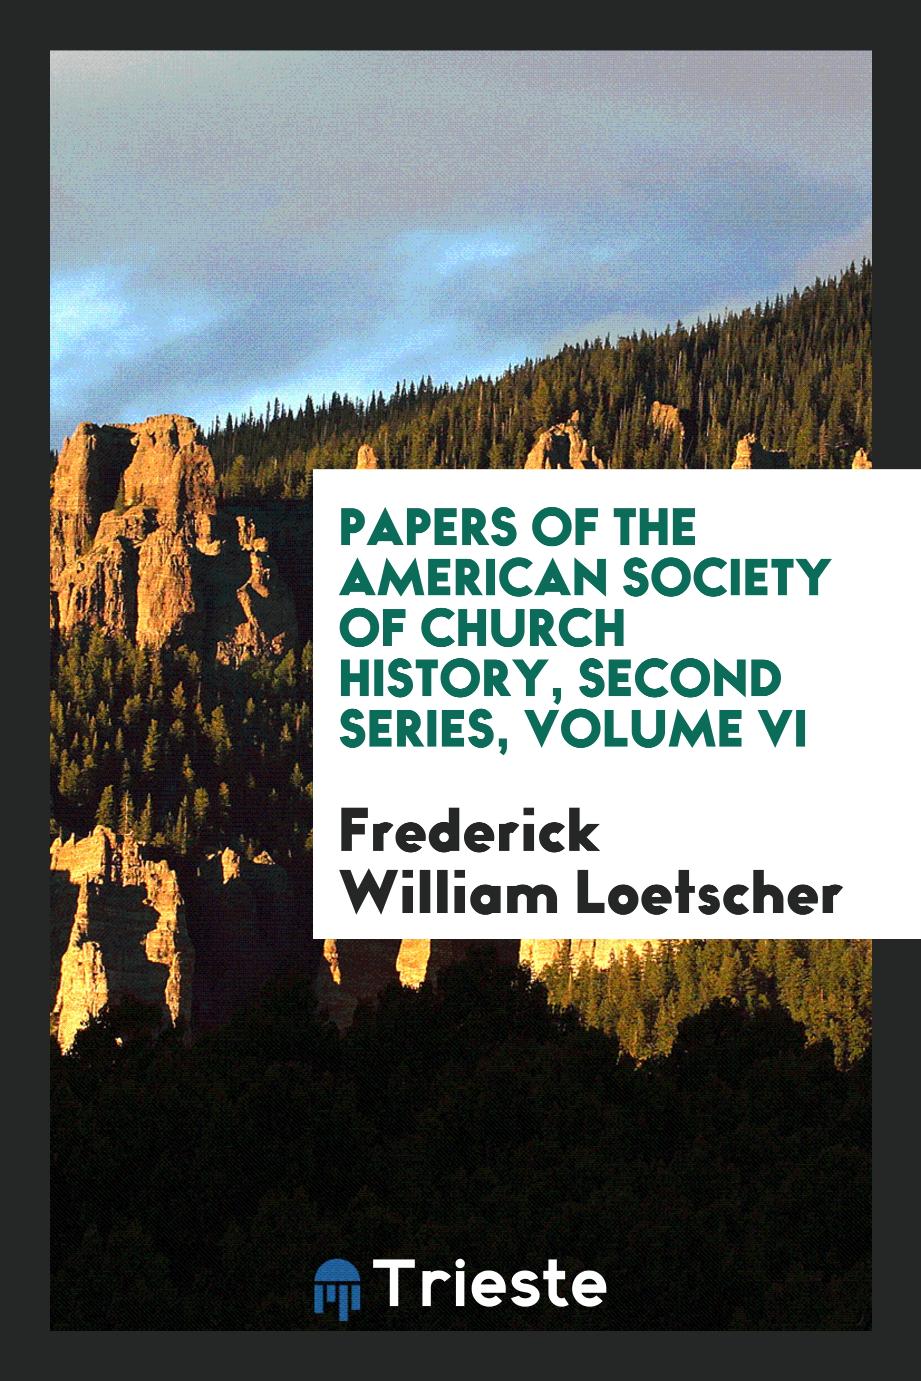 Papers of the American Society of Church History, Second Series, Volume VI